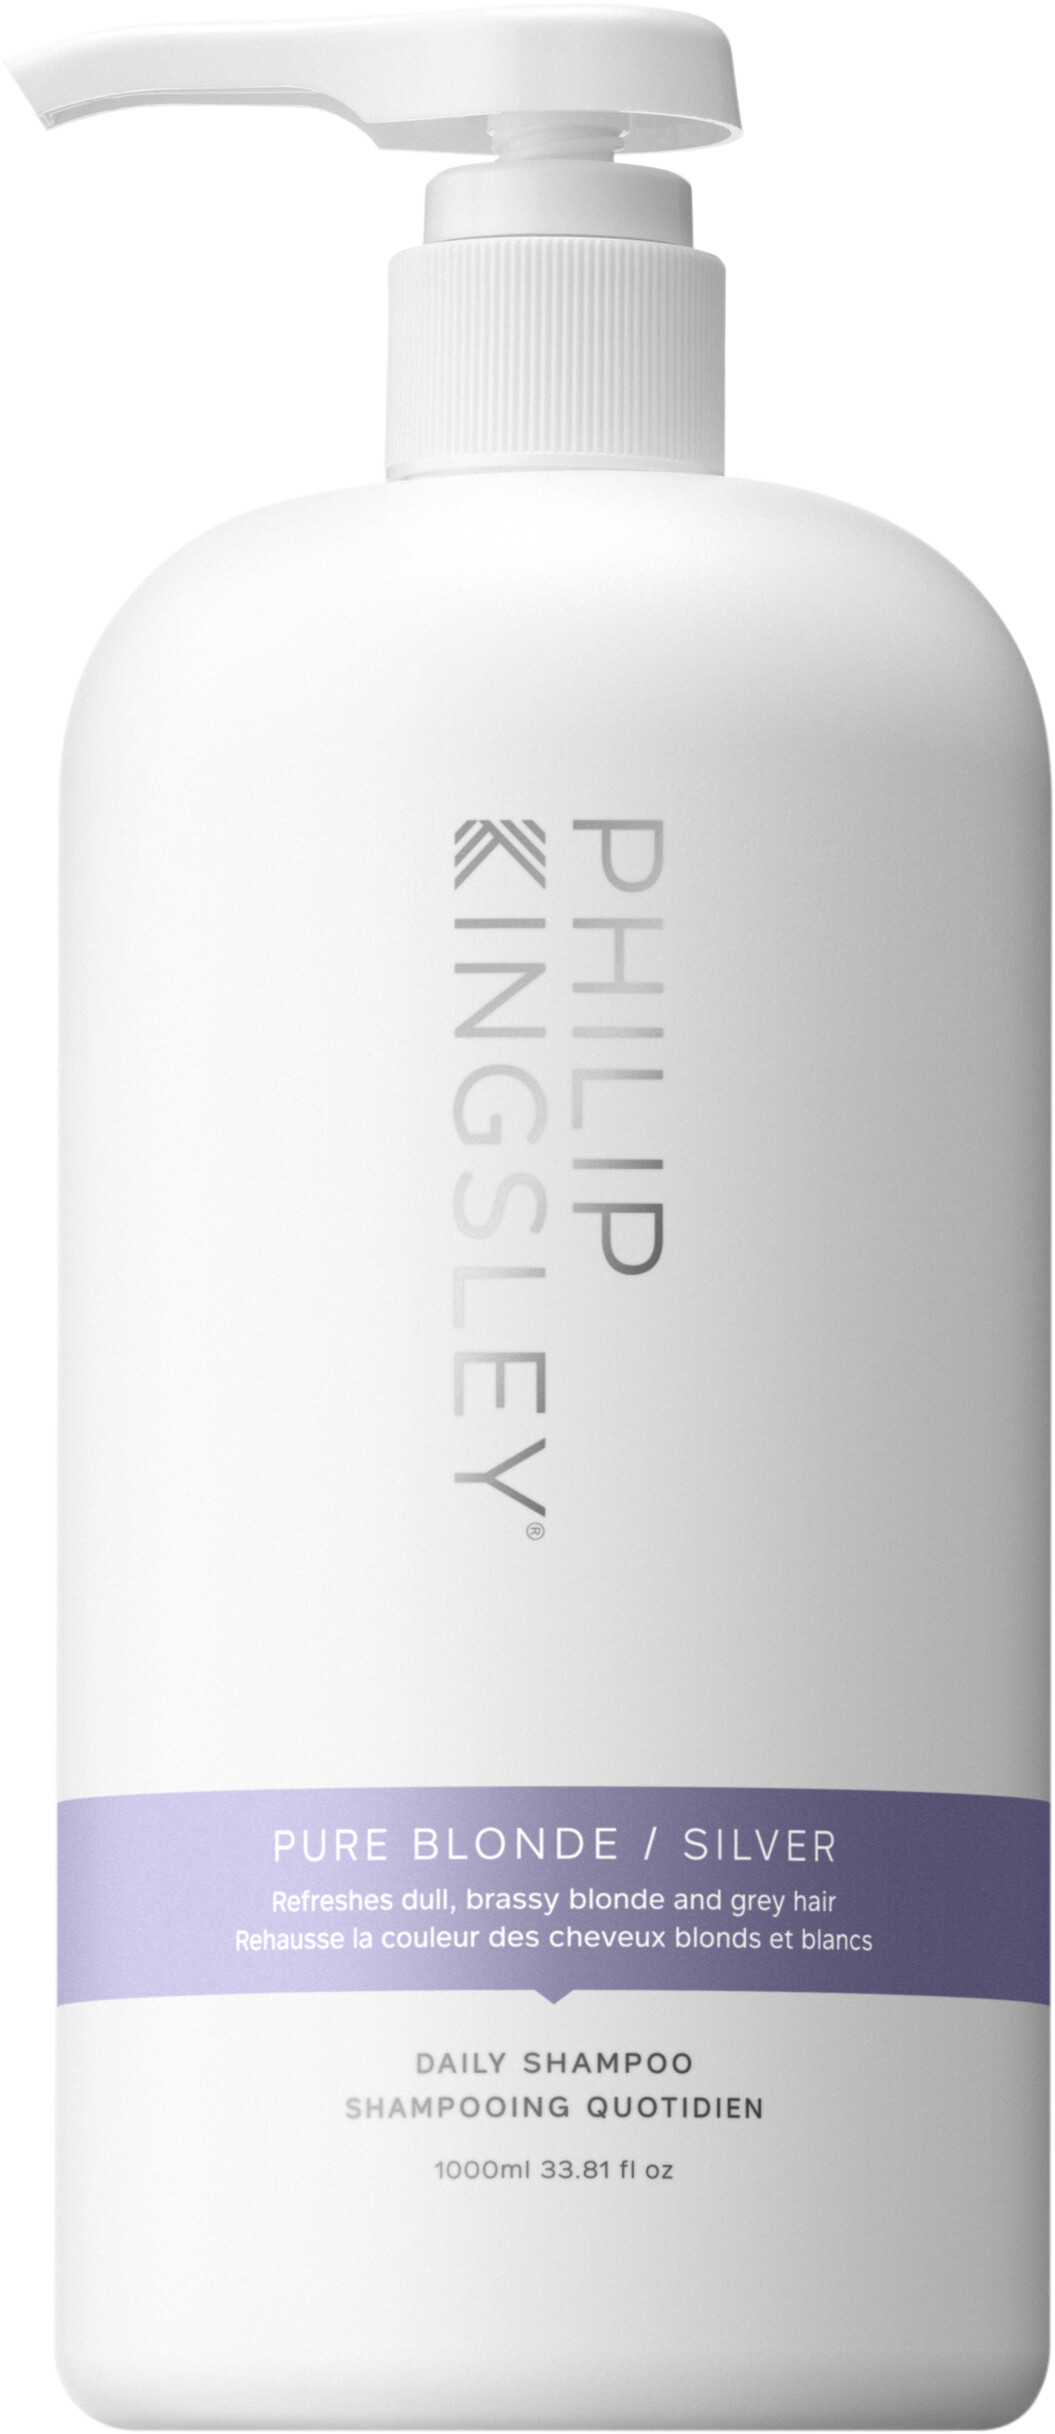 Philip Kingsley Pure Blonde / Silver Brightening  Daily Shampoo 1 litre